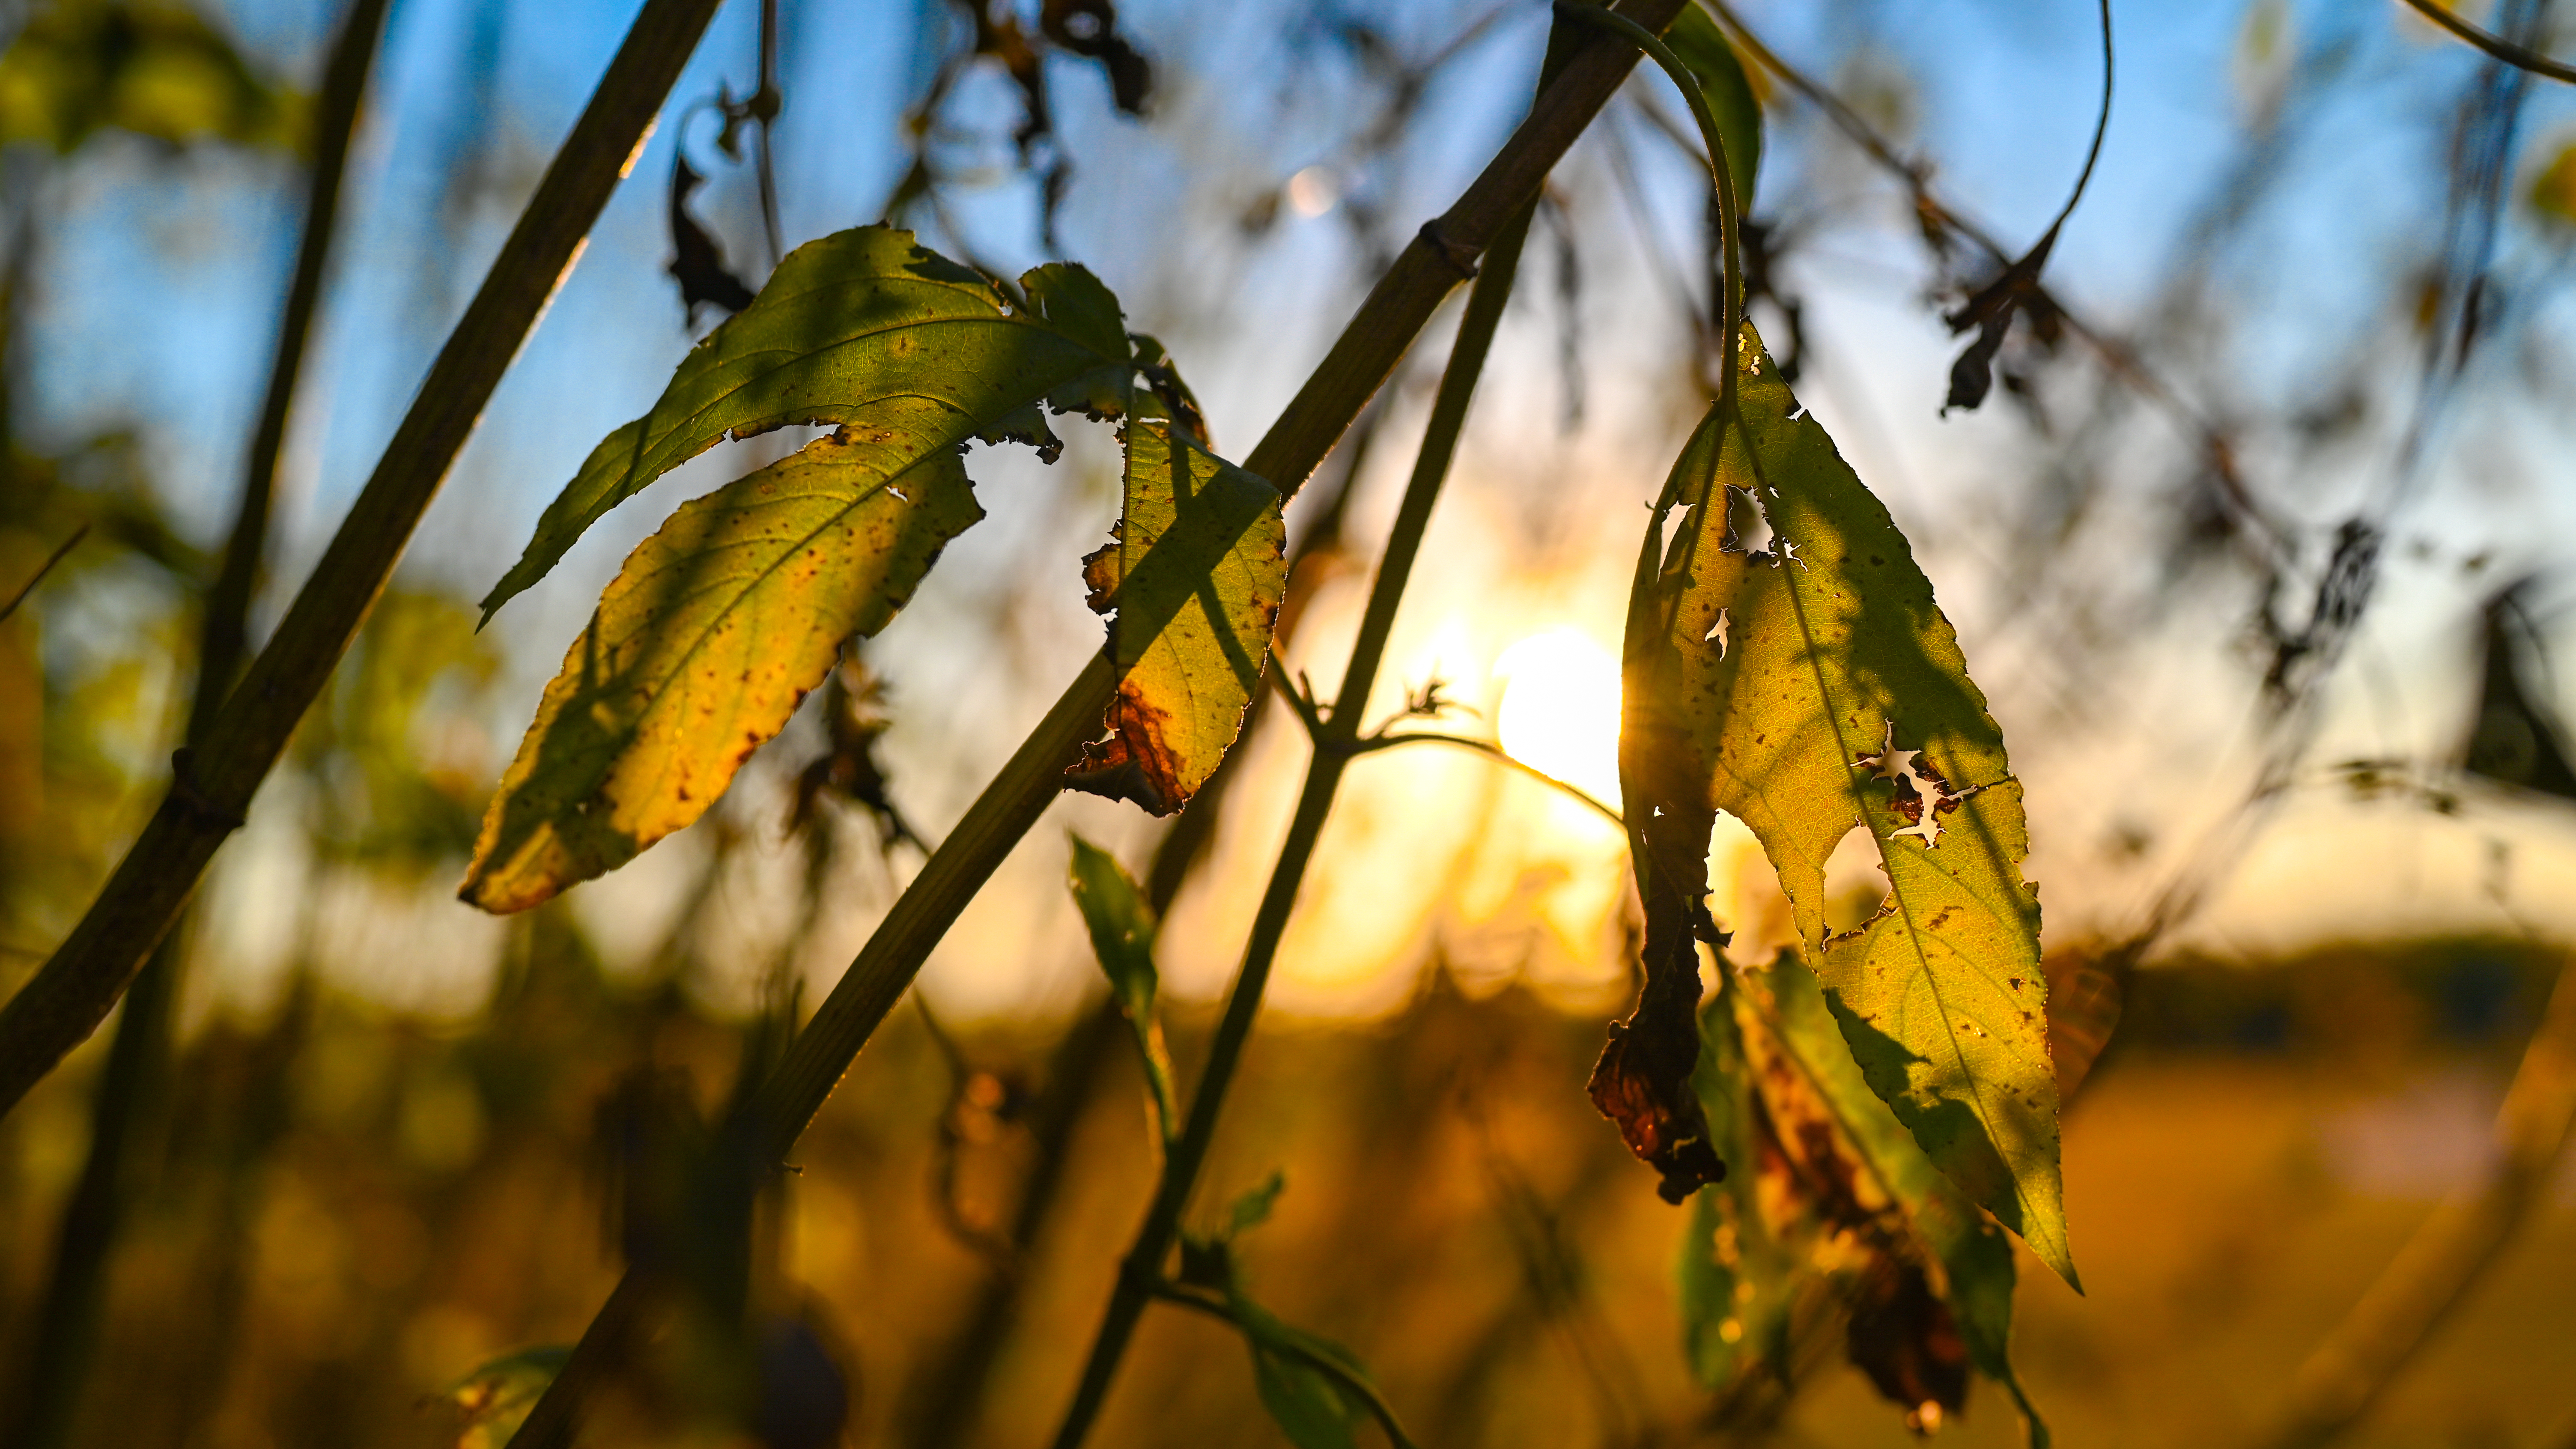 General 6016x3384 nature sunset outdoors plants leaves photography bokeh